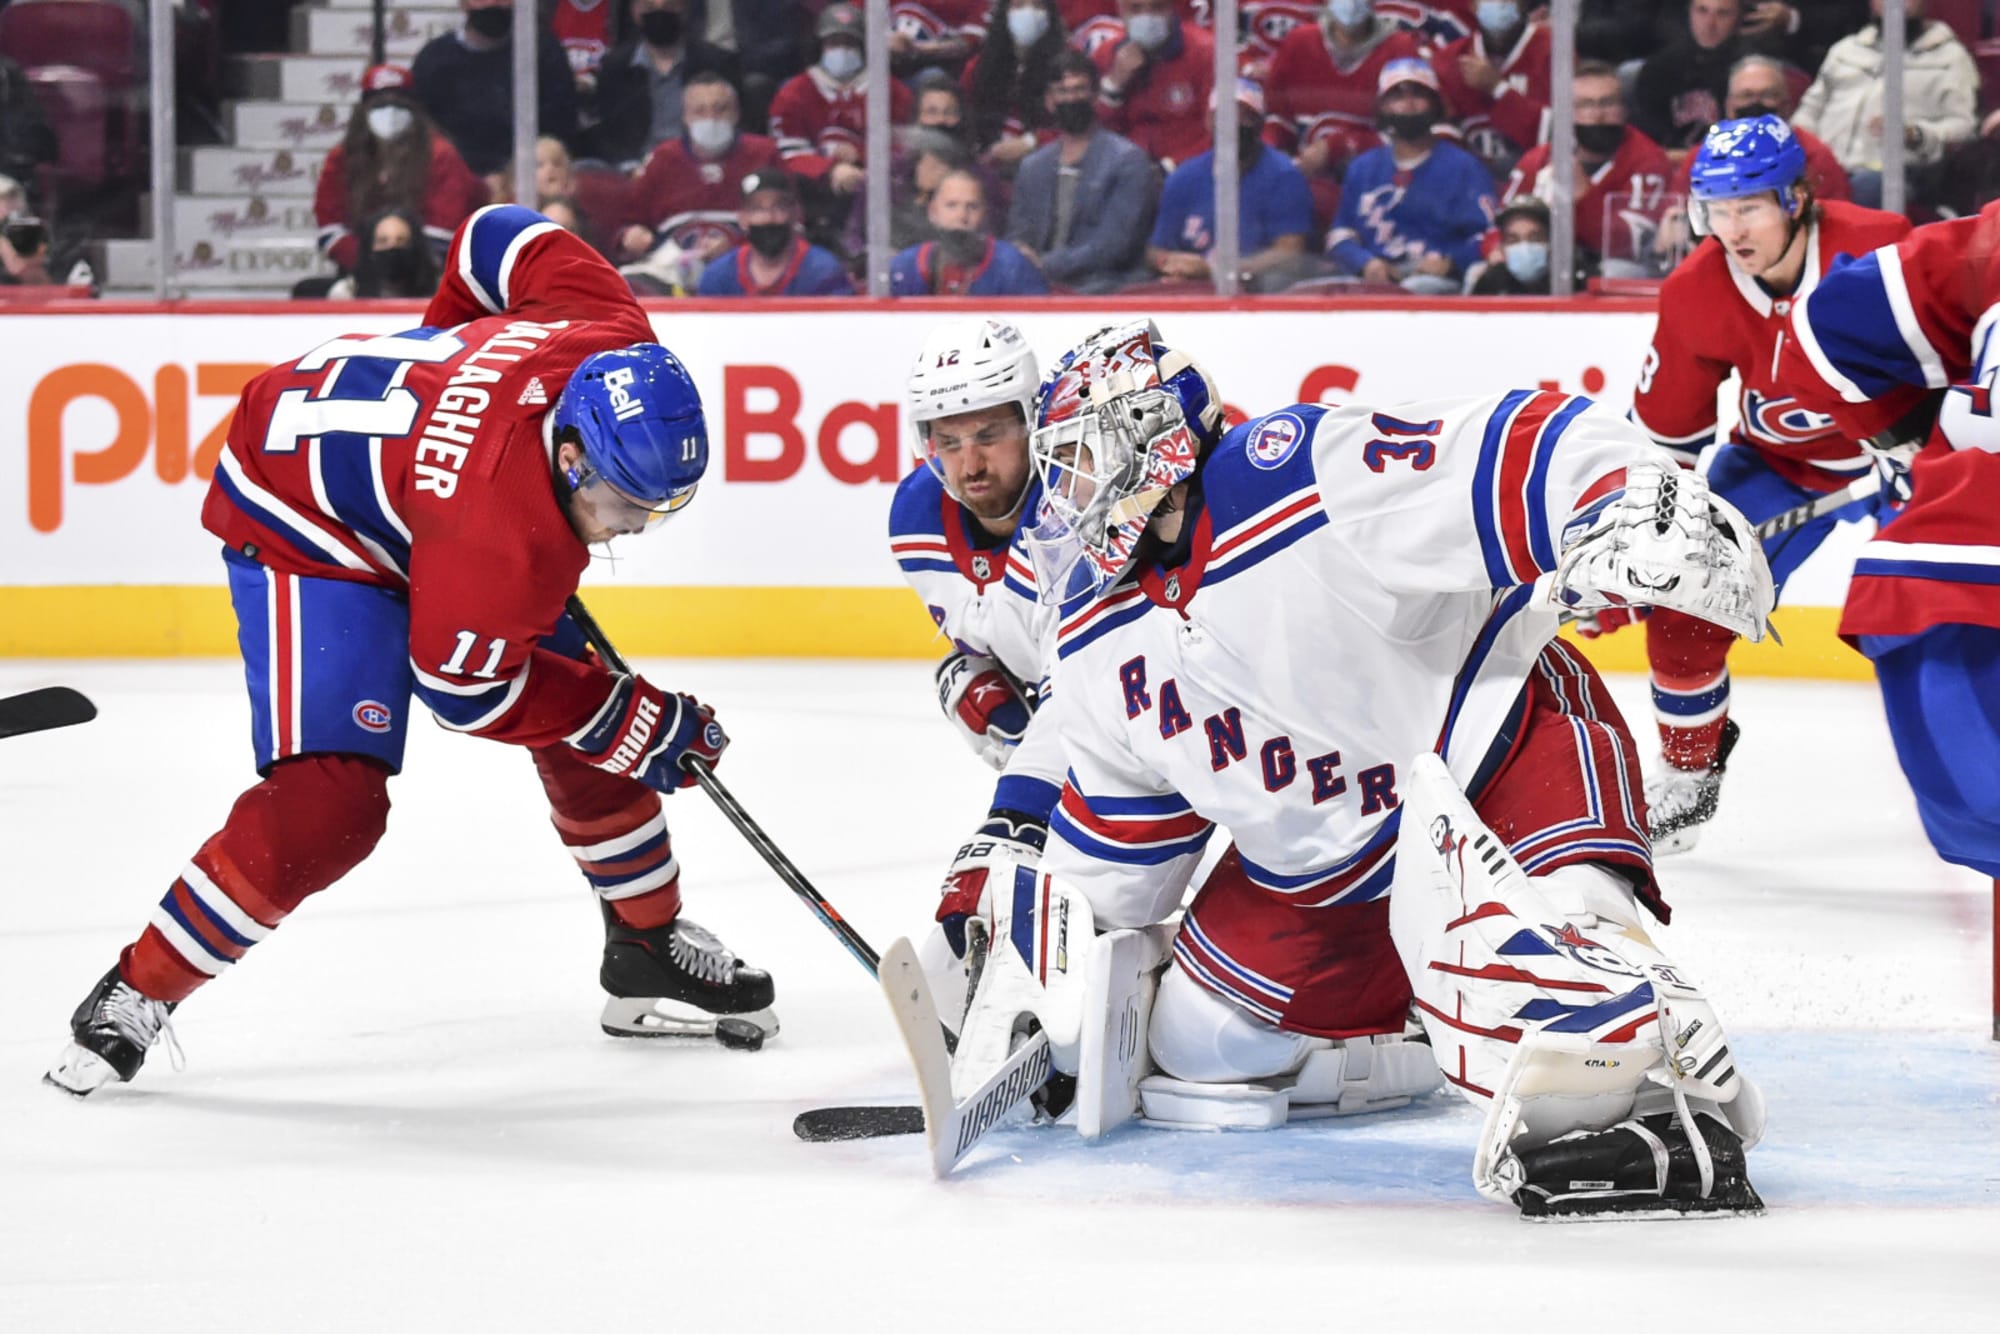 New York Rangers go for 4 in a row versus the Montreal Canadiens